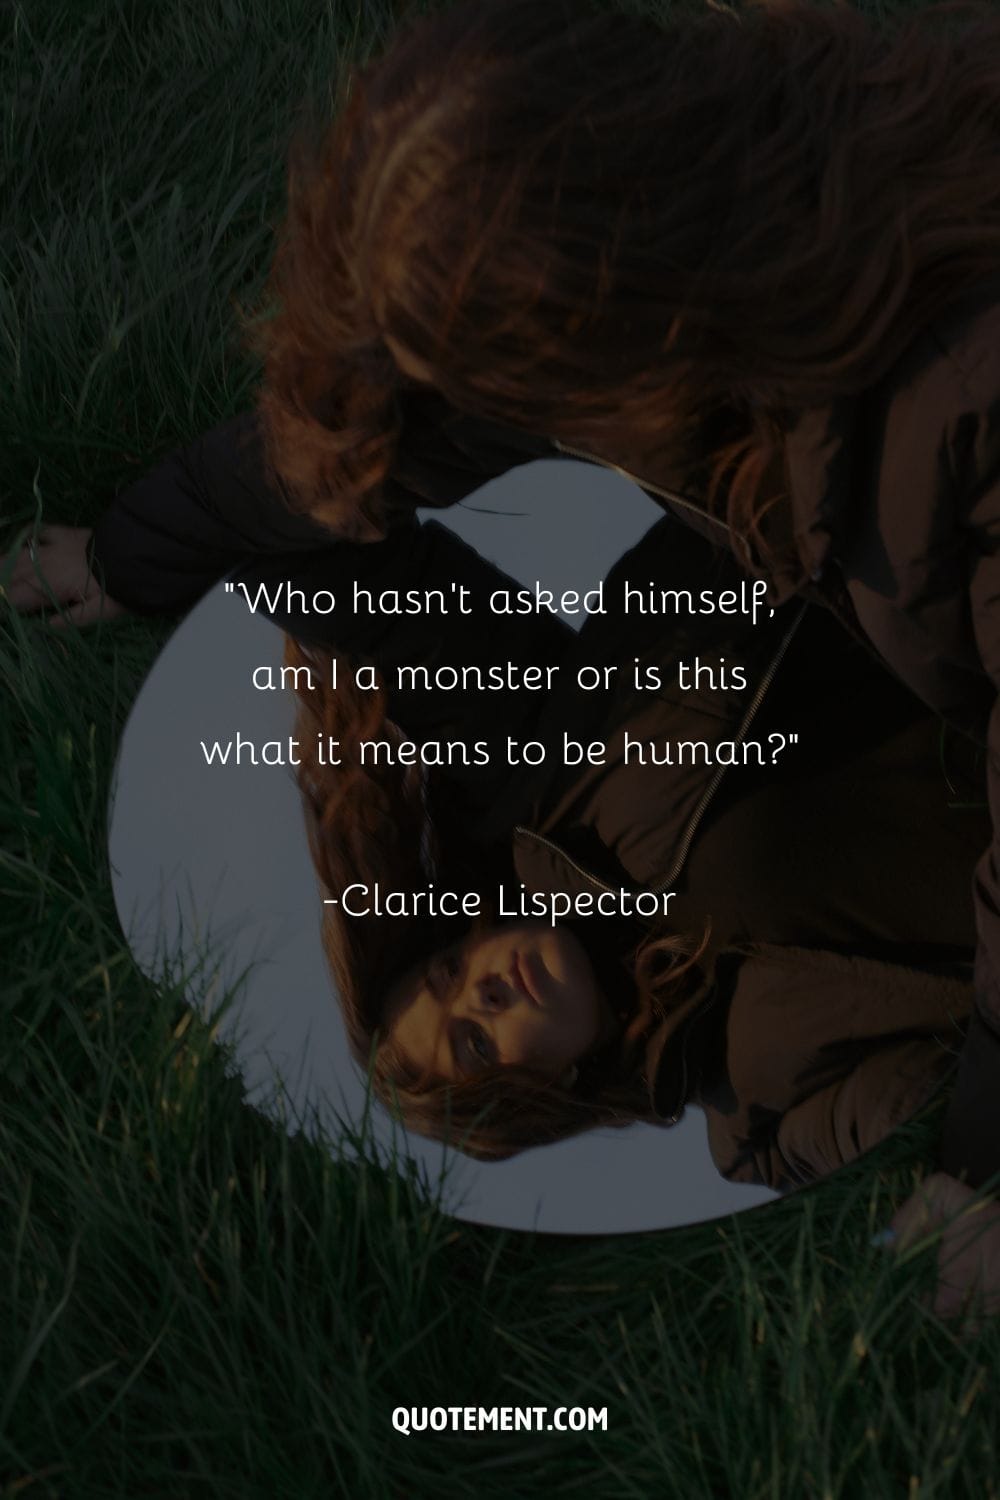 Who hasn't asked himself, am I a monster or is this what it means to be human – Clarice Lispector